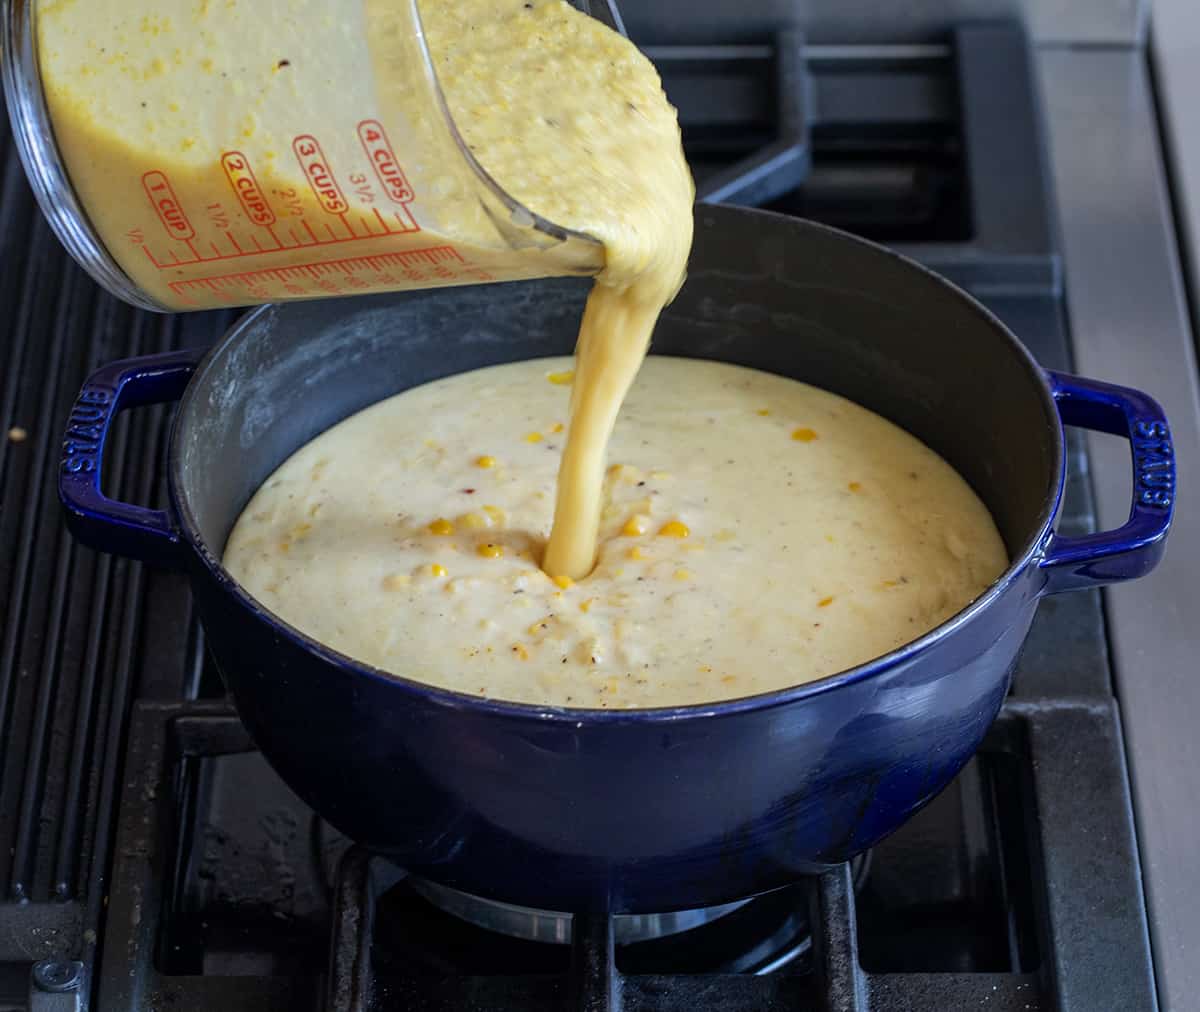 Pouring pureed corn into a pot of Corn Chowder.